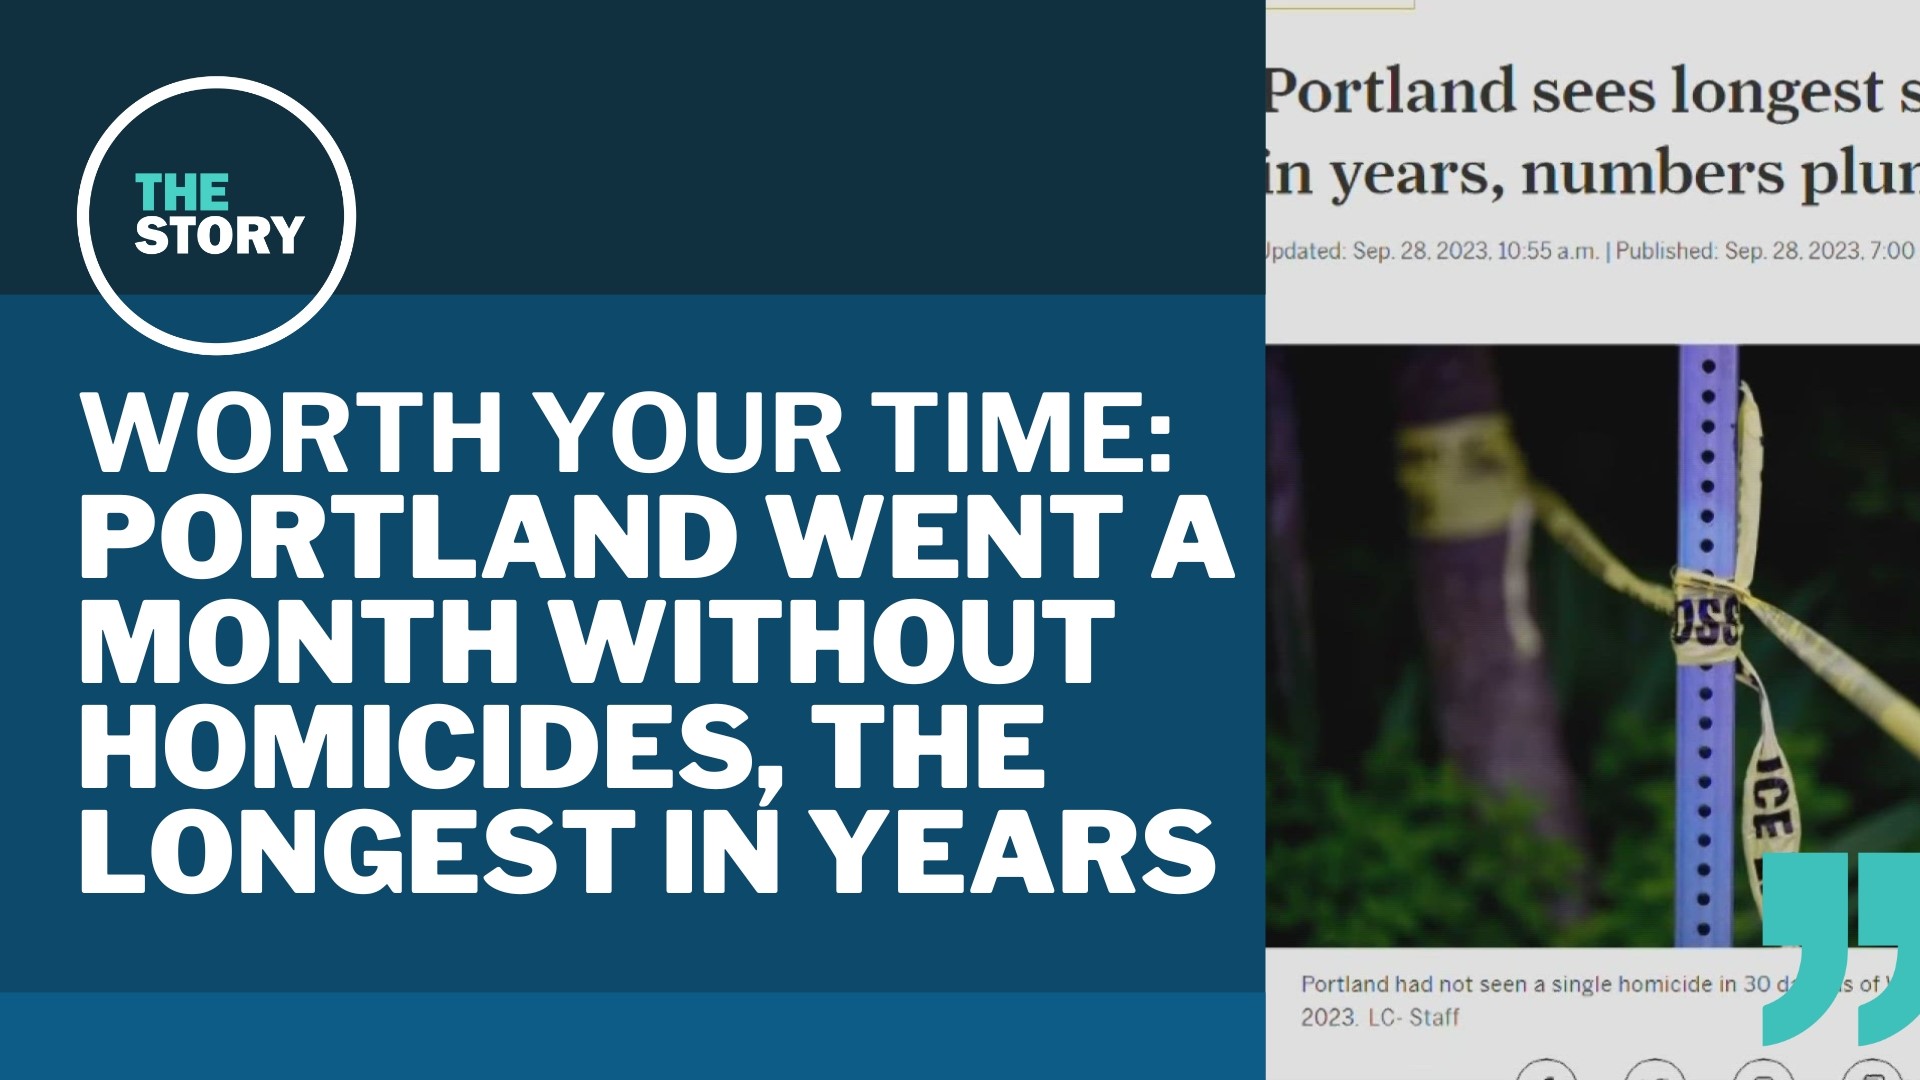 Although Portland police provided a harrowing report Thursday about fatal child drug overdoses, The Oregonian reports that Portland homicides have hit a dry spell.